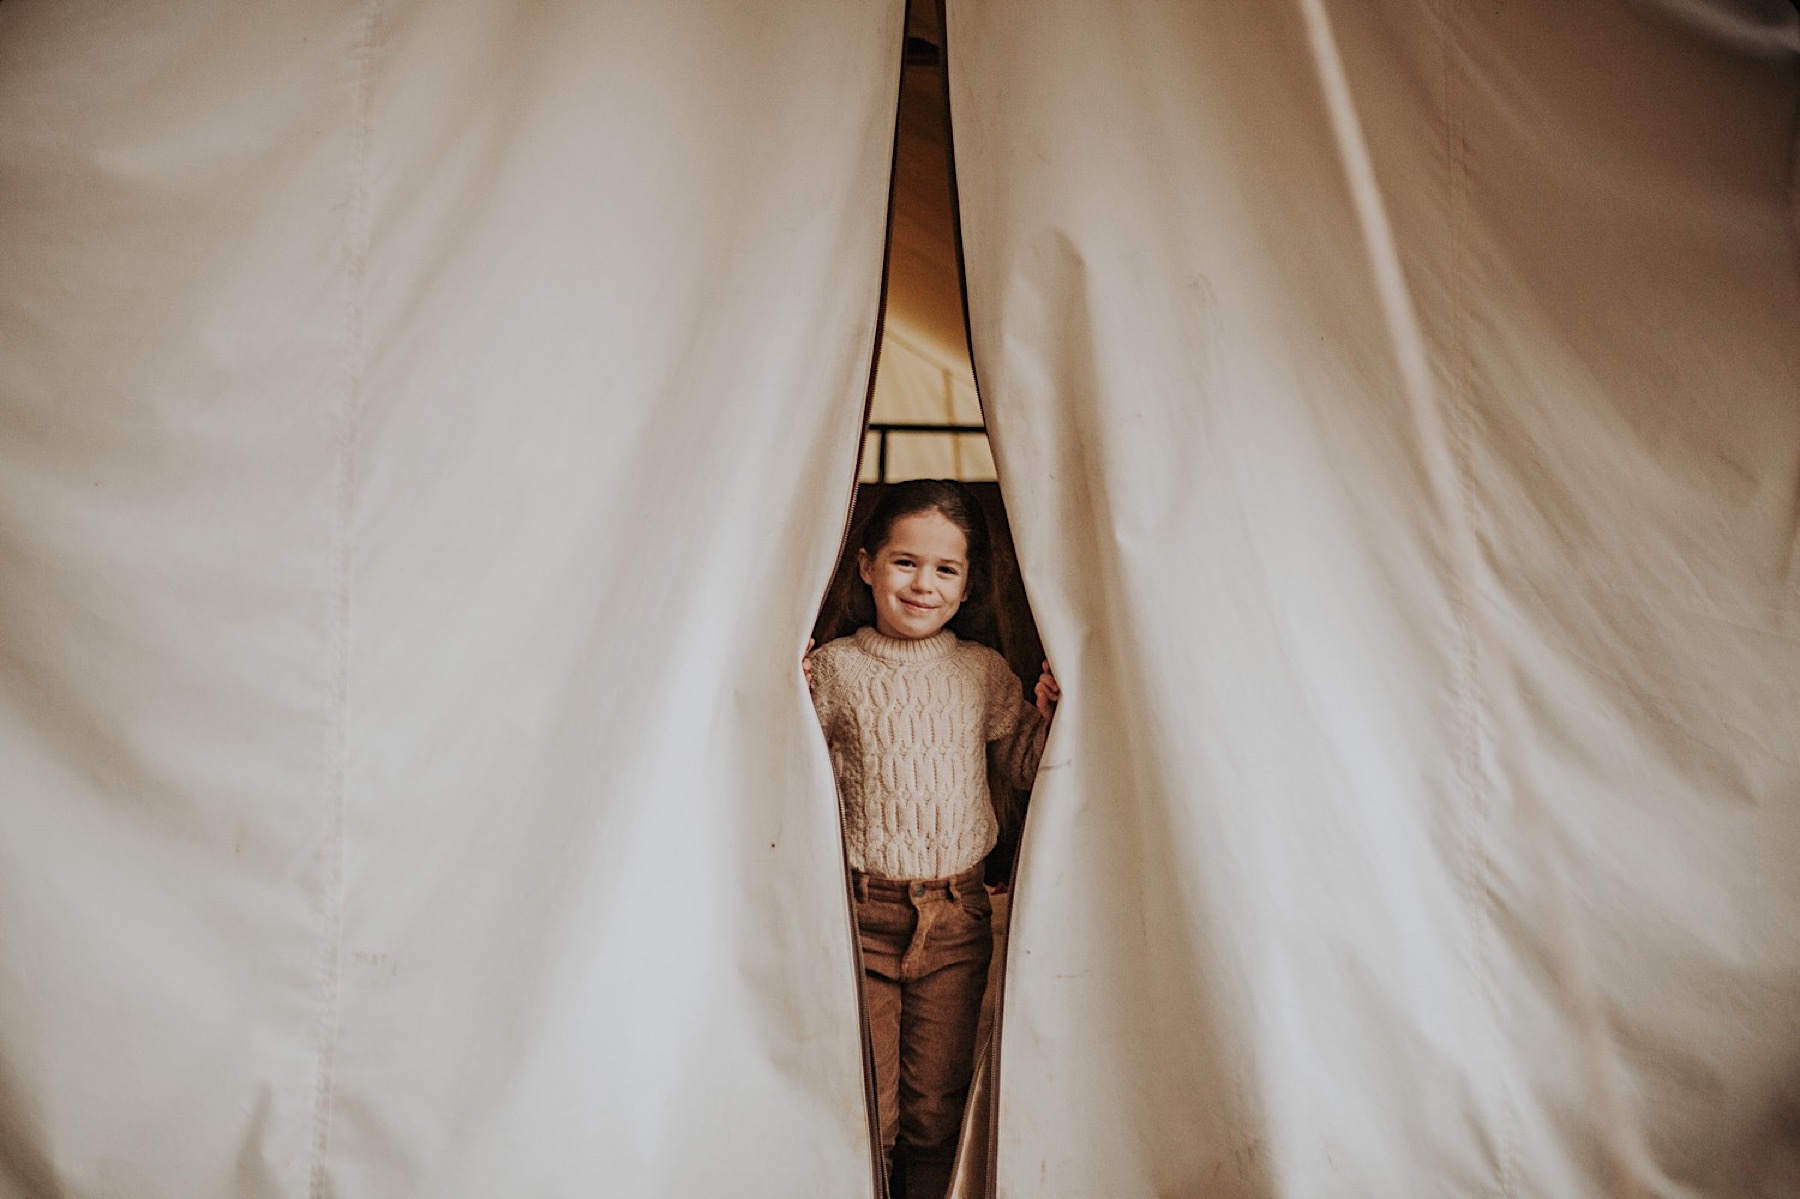 family portraits under canvas great smoky mountains photographer